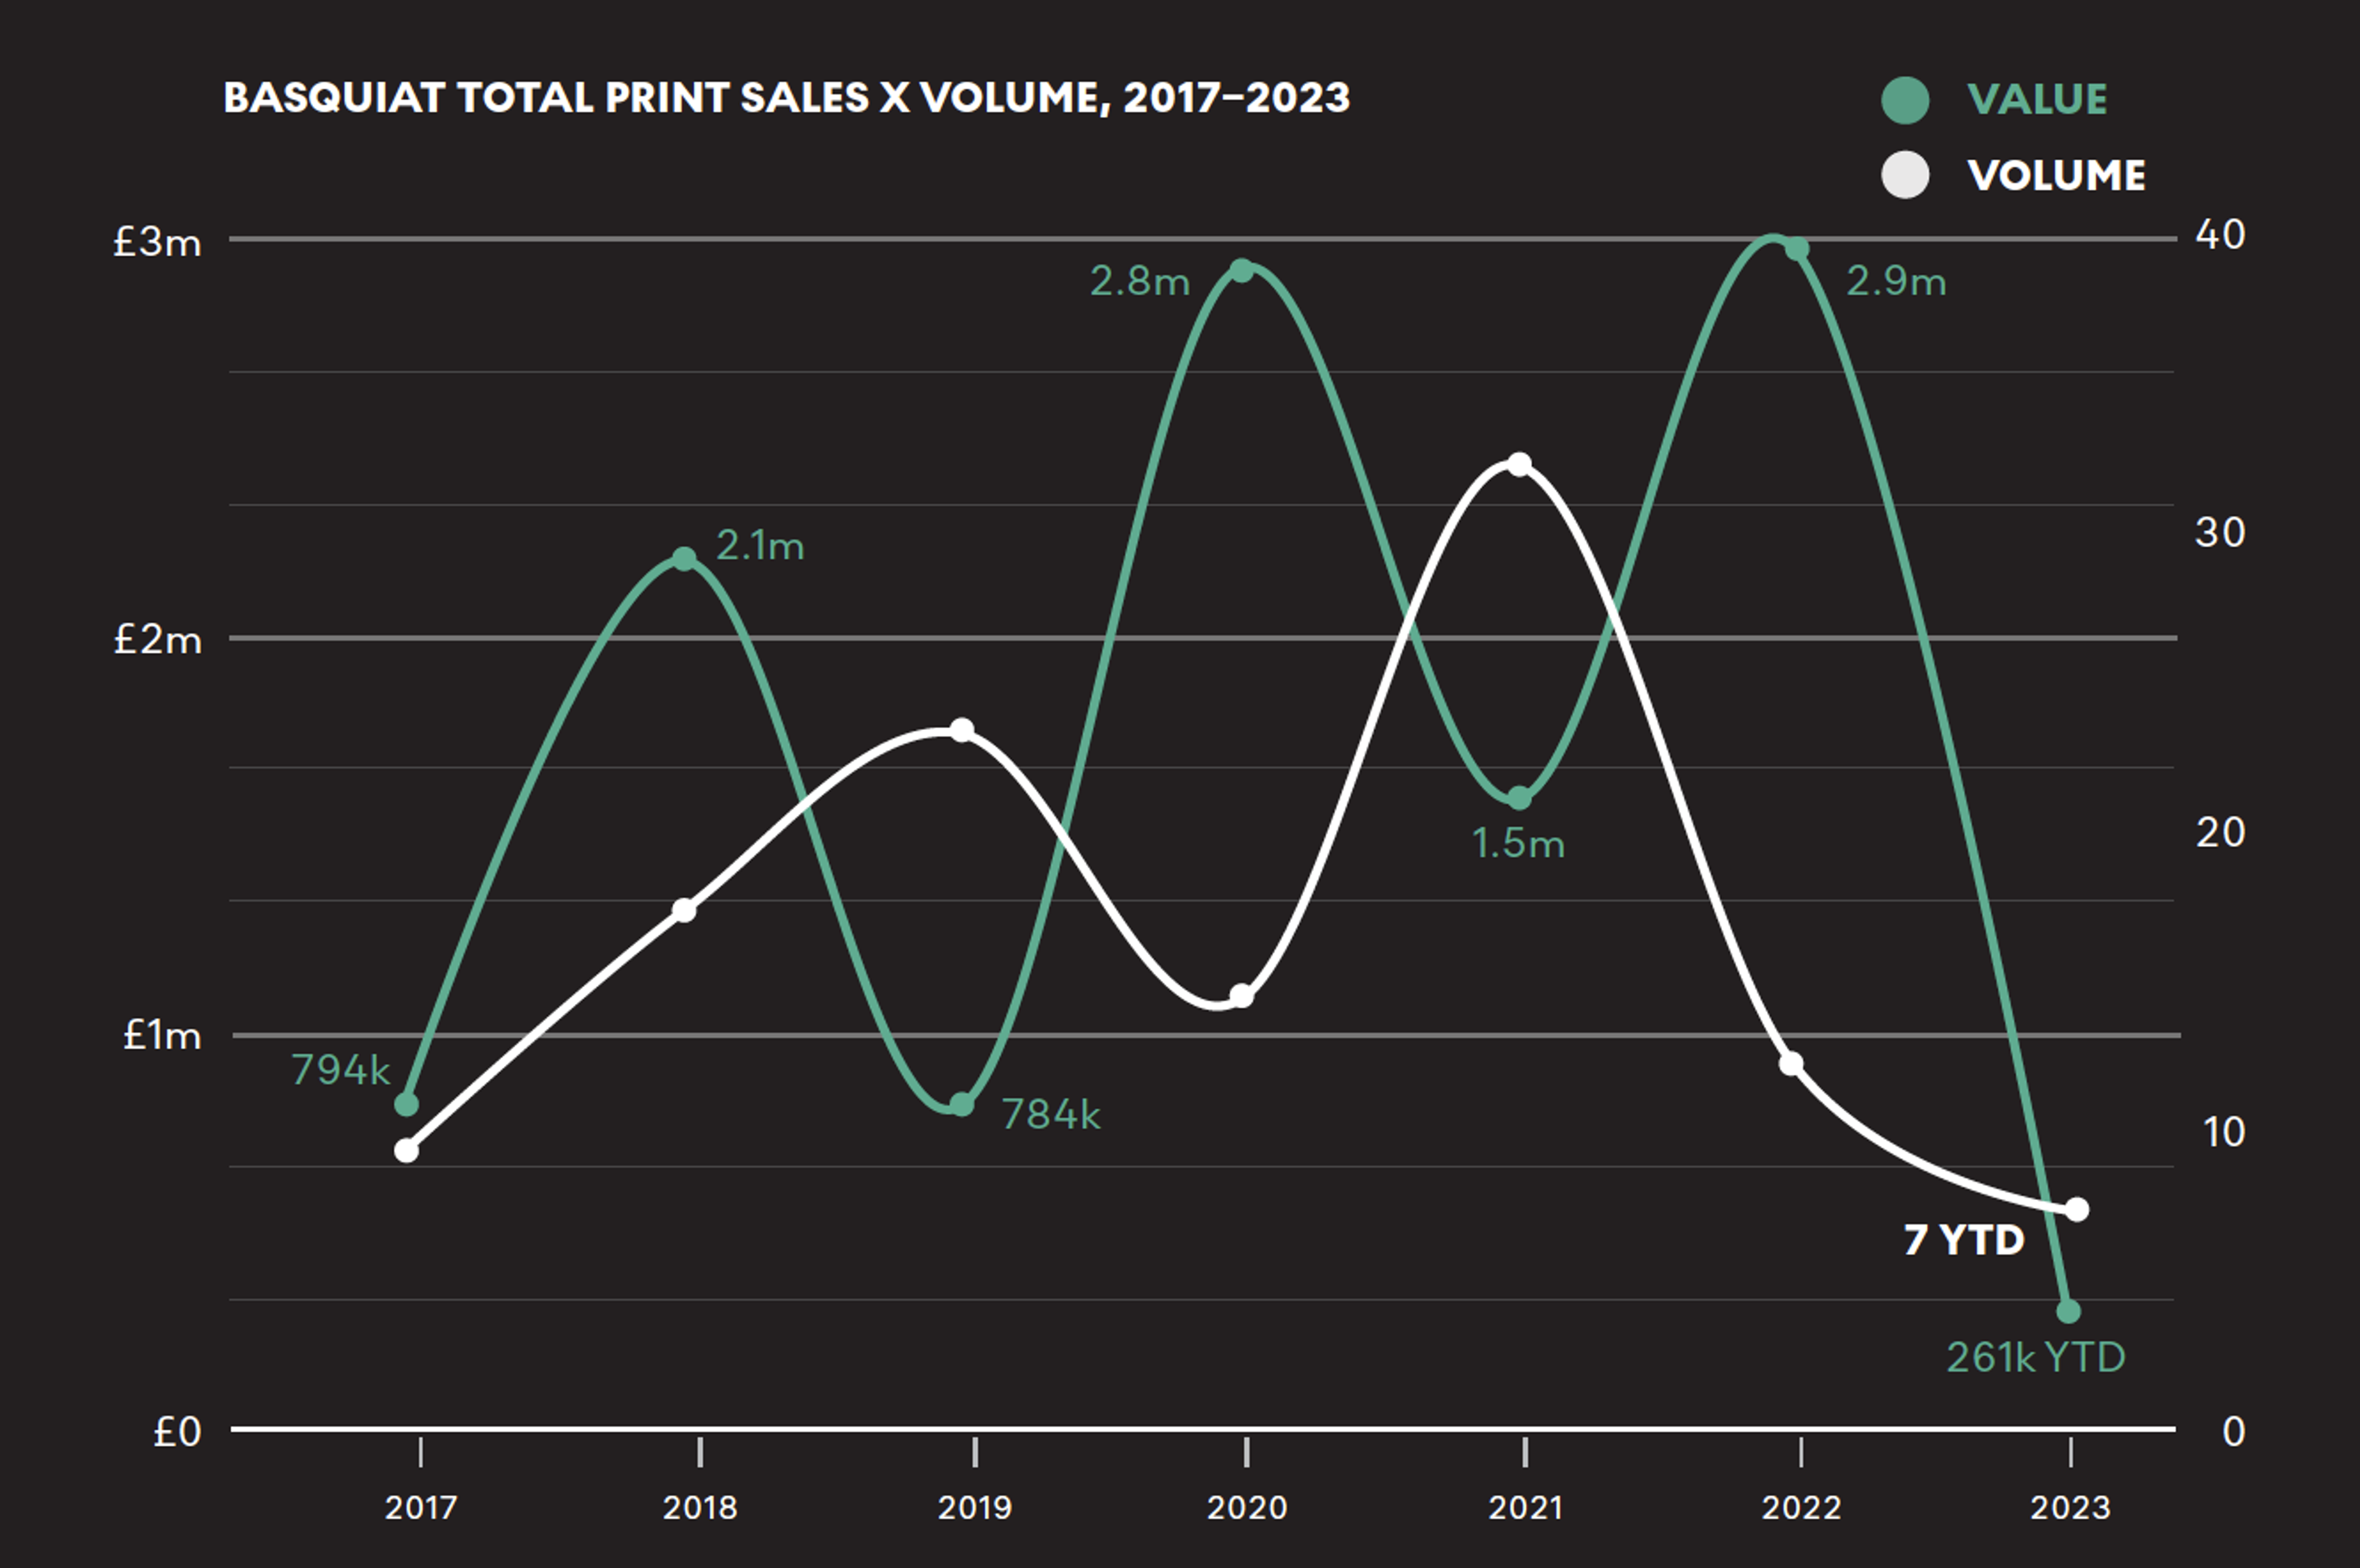  A double line graph illustrating Jean-Michel Basquiat's total year-on-year print performance and sales volume over a five-year period from 2017 to 2023.